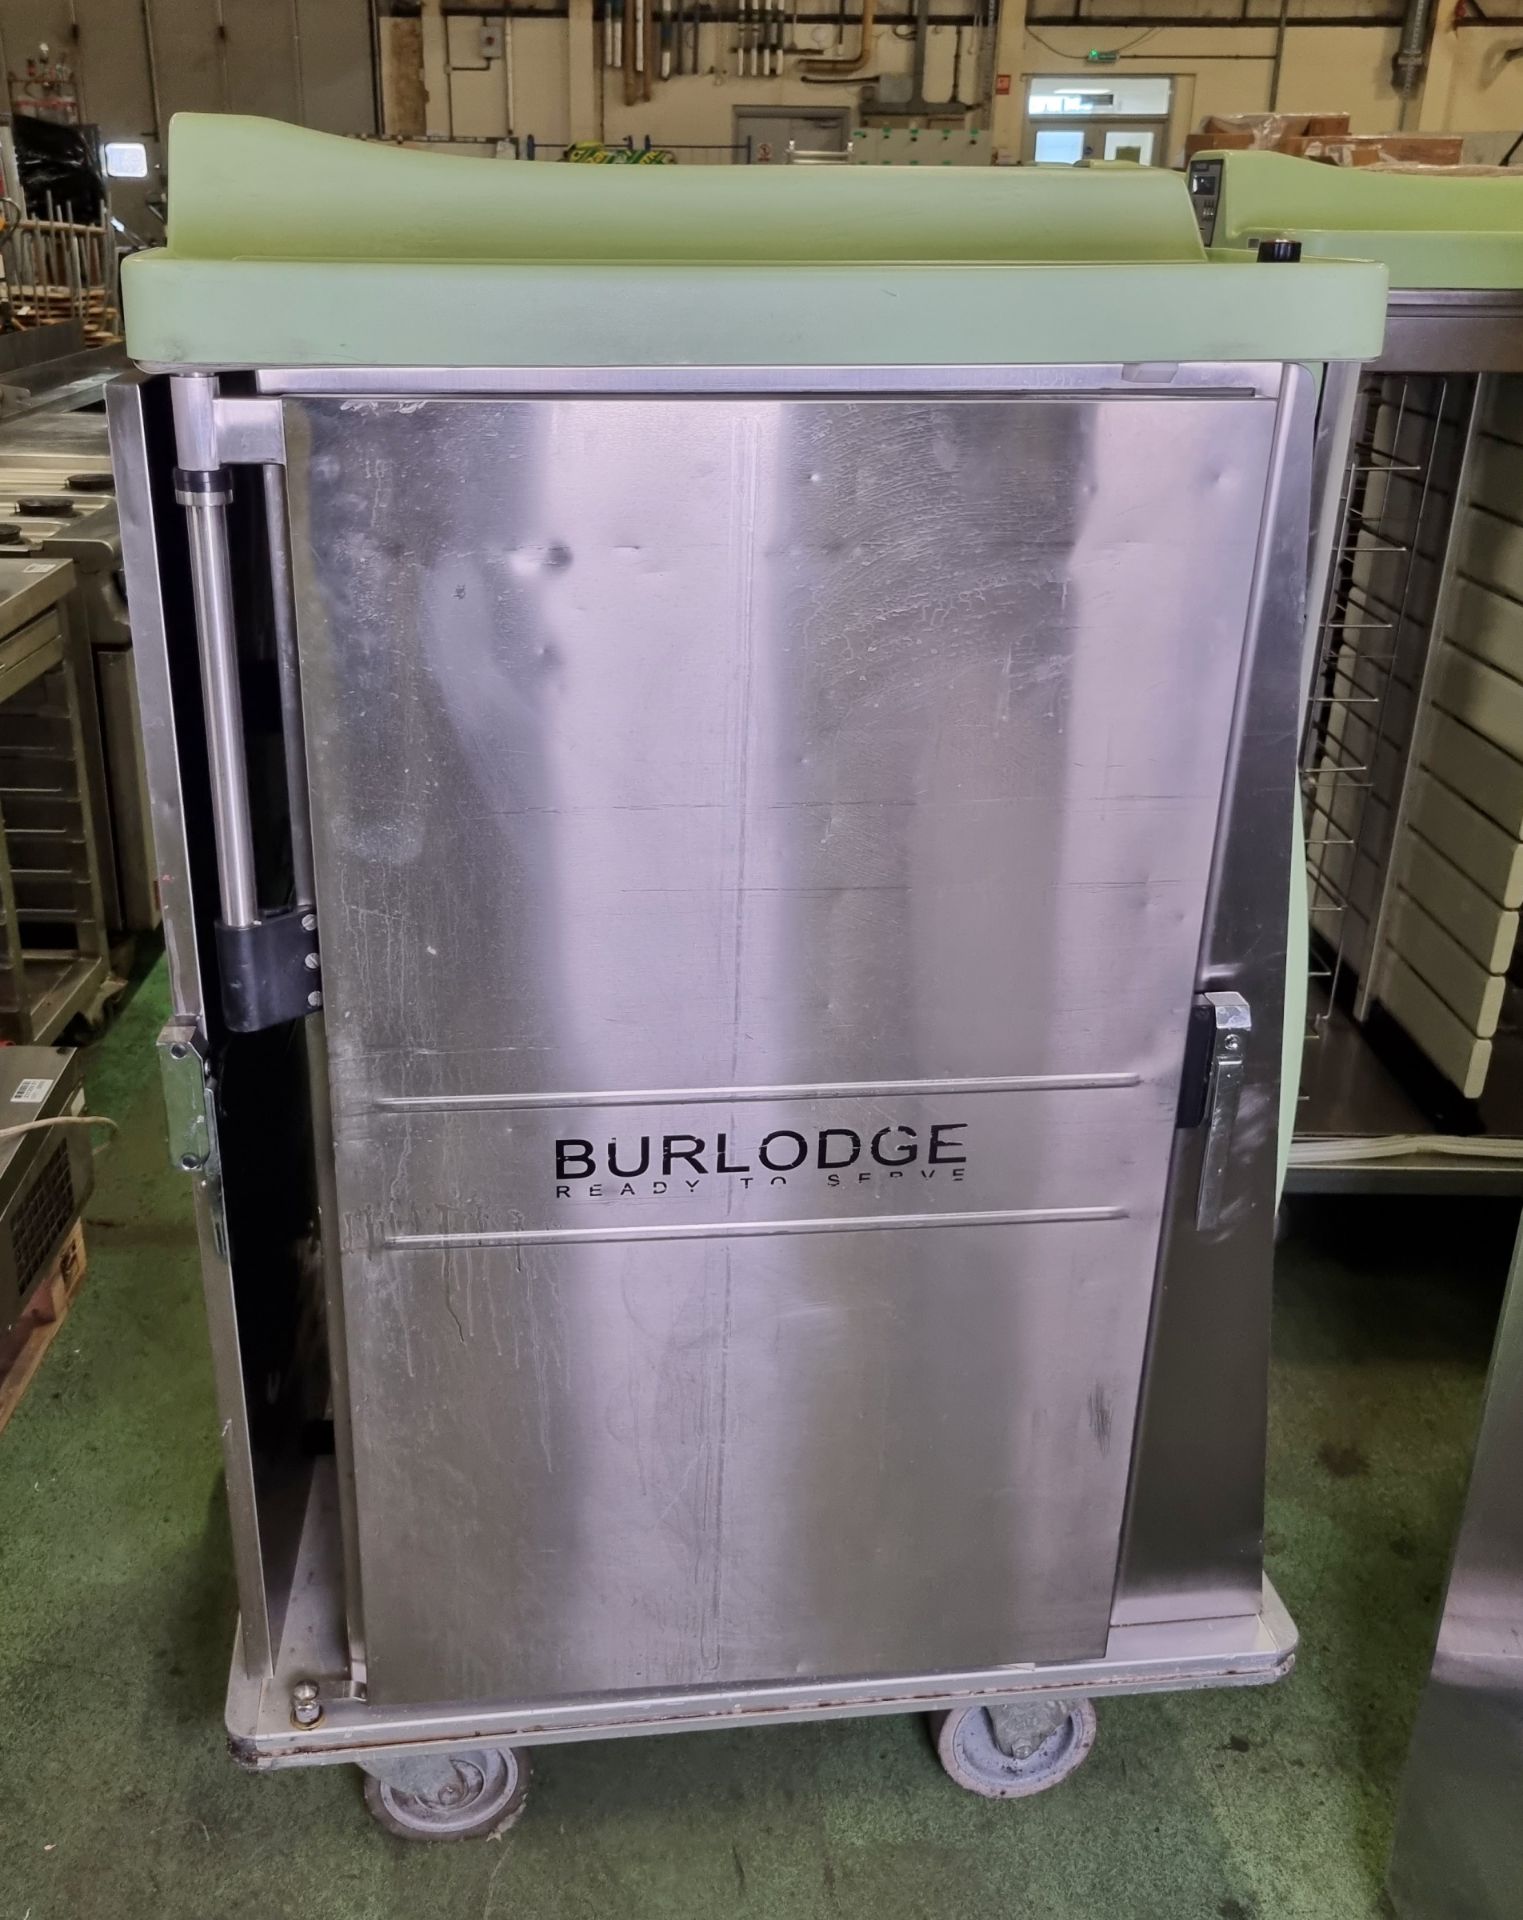 Burlodge RTS hot and cold tray delivery trolley - opens boths sides - W 800 x D 1100 x H 1500mm - Image 2 of 5